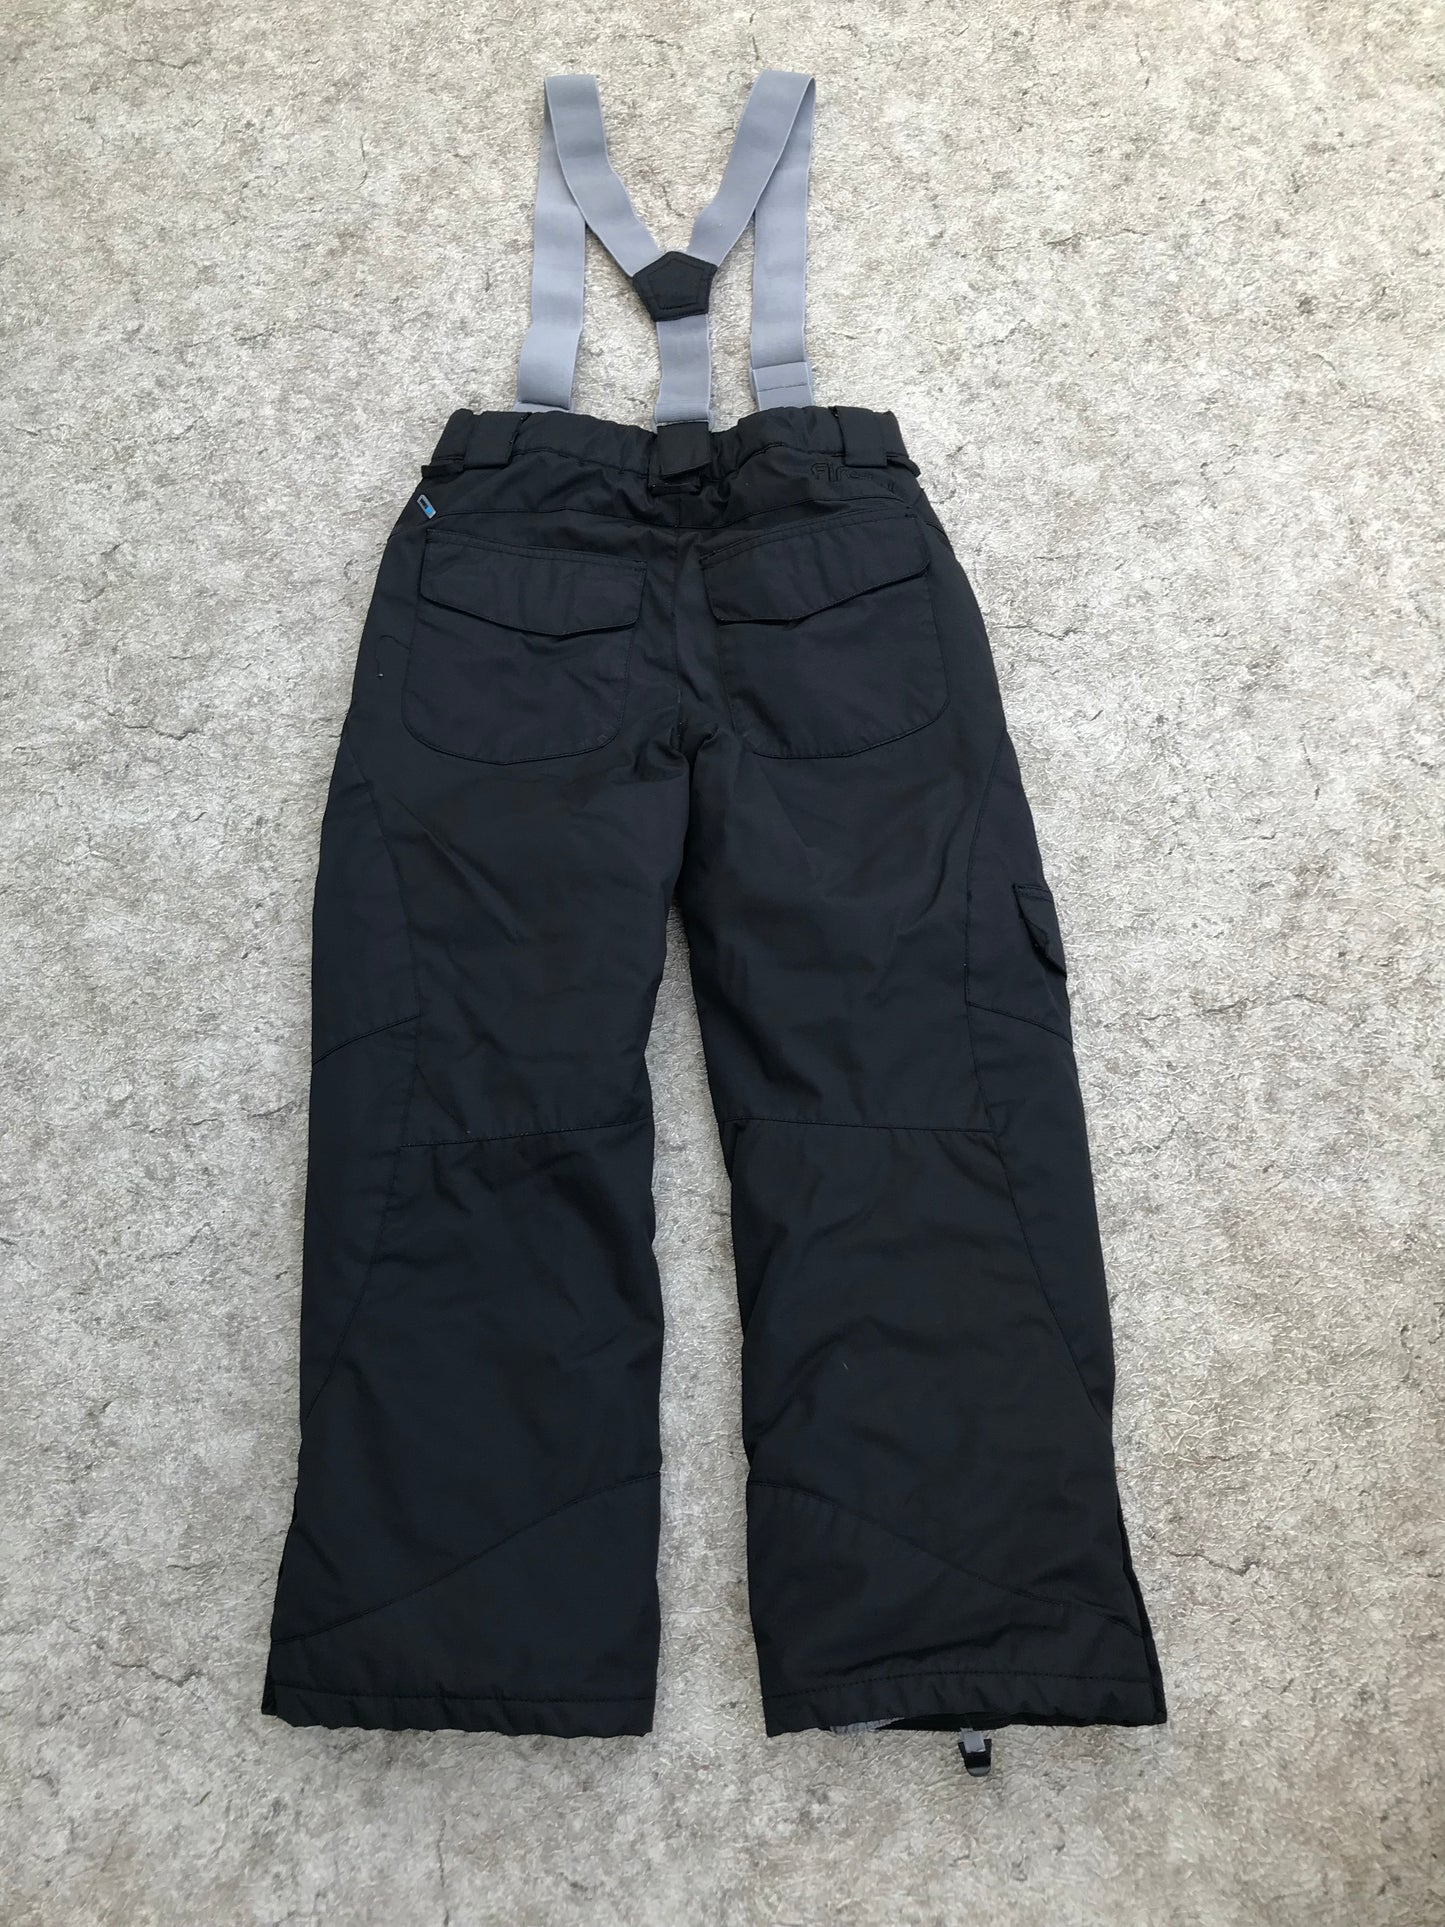 Snow Pants Child Size 8-10 Firefly Black With Suspenders Excellent